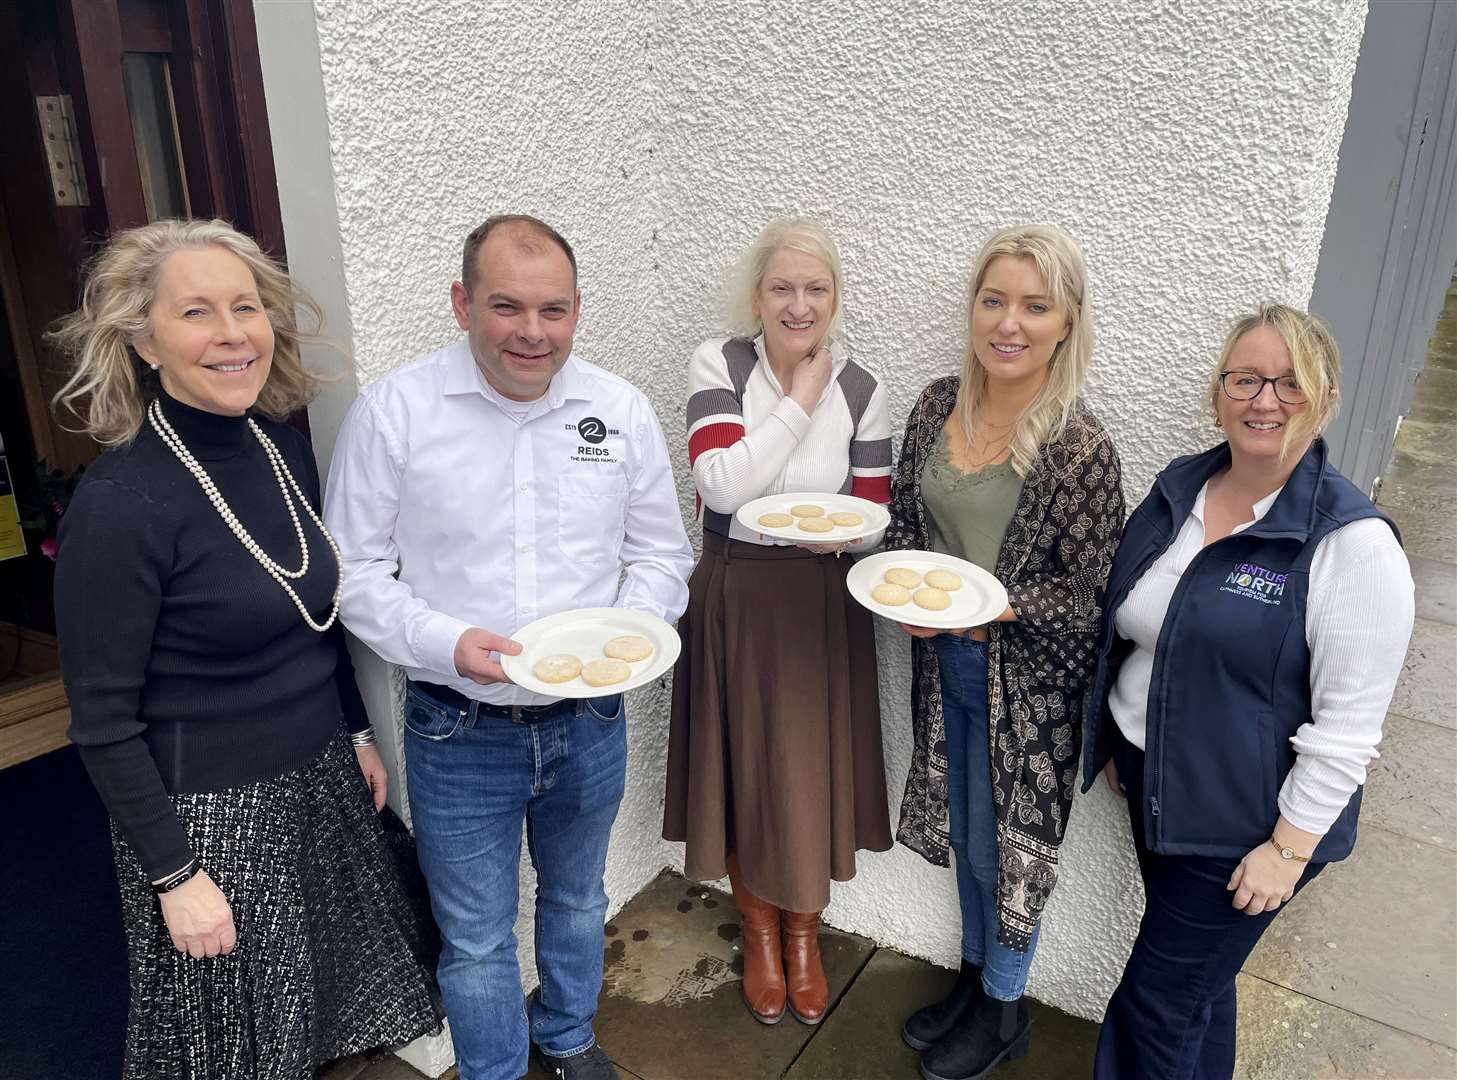 Ellie Lamont (left), owner of Mackays Hotel and chairperson of Venture North, and Cathy Earnshaw (right), Venture North destination strategy manager, with Shortbread Showdown judges Gary Reid, June McIvor and Catriona Corbett outside Mackays Hotel.